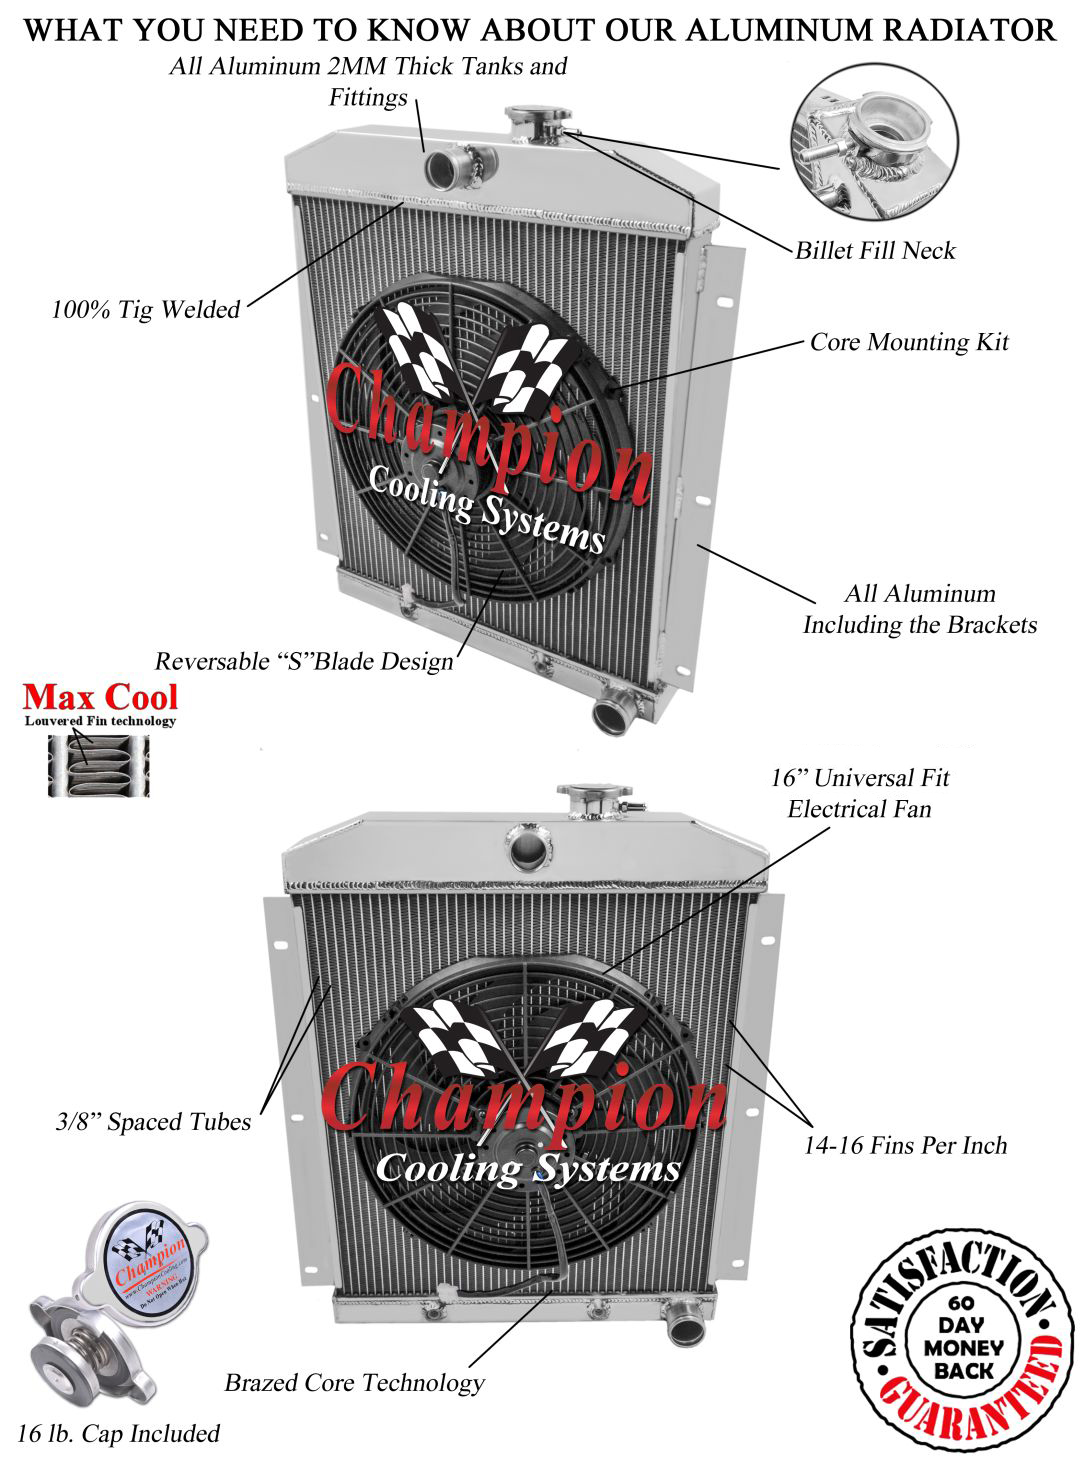 http://www.championcooling.com/photos/Photos%20White/With%20Fans/Combos/5100/5100%20Combo%20Ad.jpg